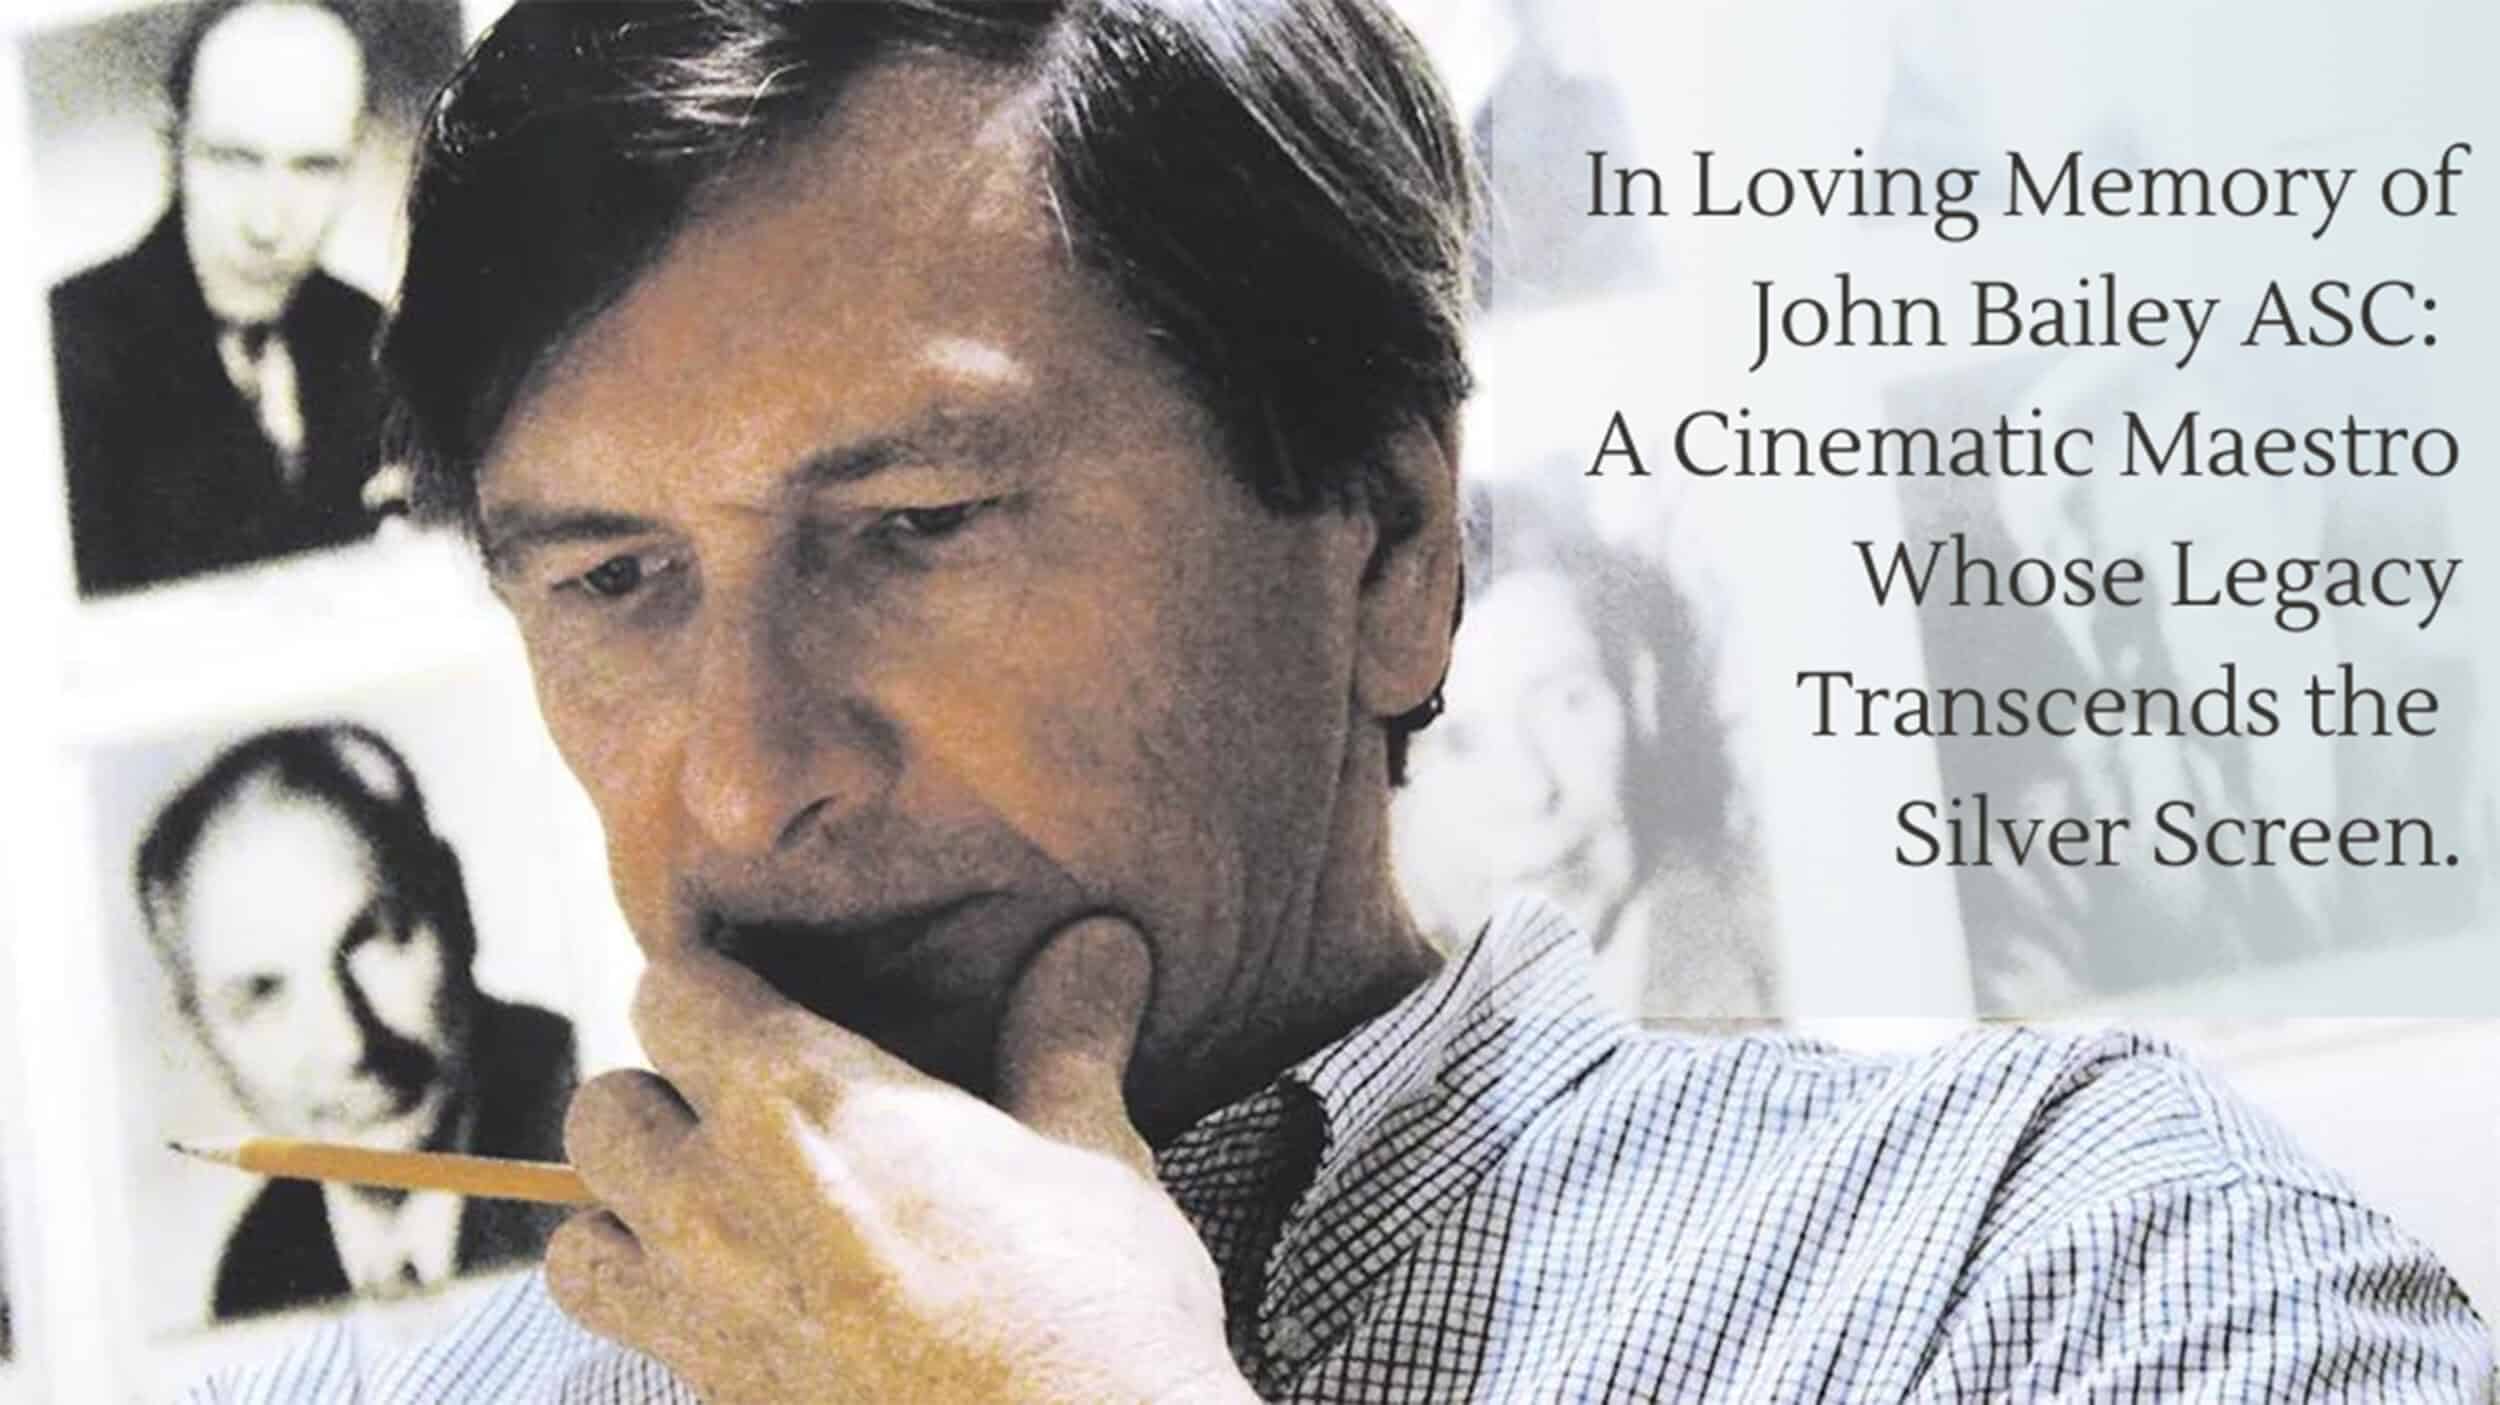 In Loving Memory of John Bailey ASC: A Cinematic Maestro Whose Legacy Transcends the Silver Screen